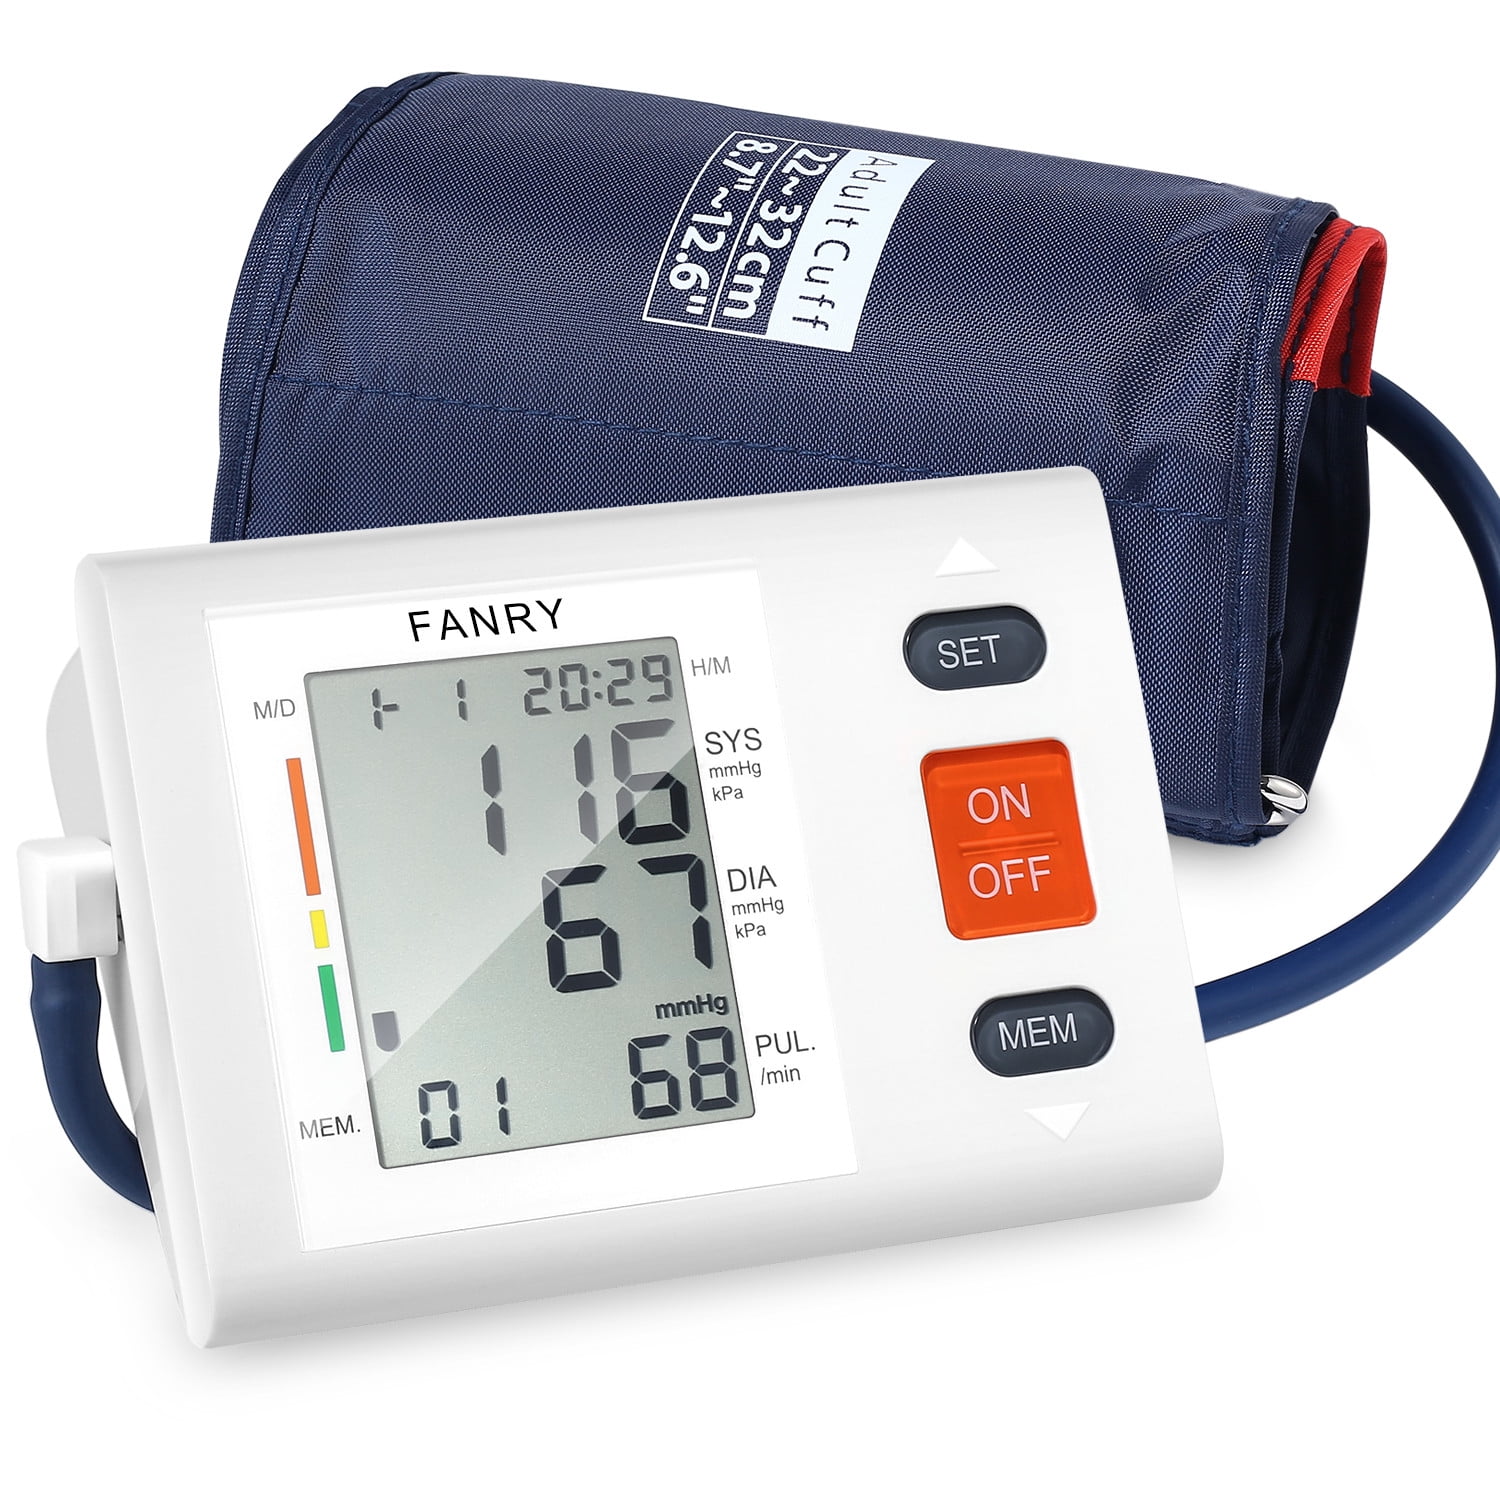 Diktook Blood Pressure Monitors Machine Upper Arm Large Cuff for Arm, Automatic BP Monitor Upper Arm with Large Backlit Display, Size: One size, White